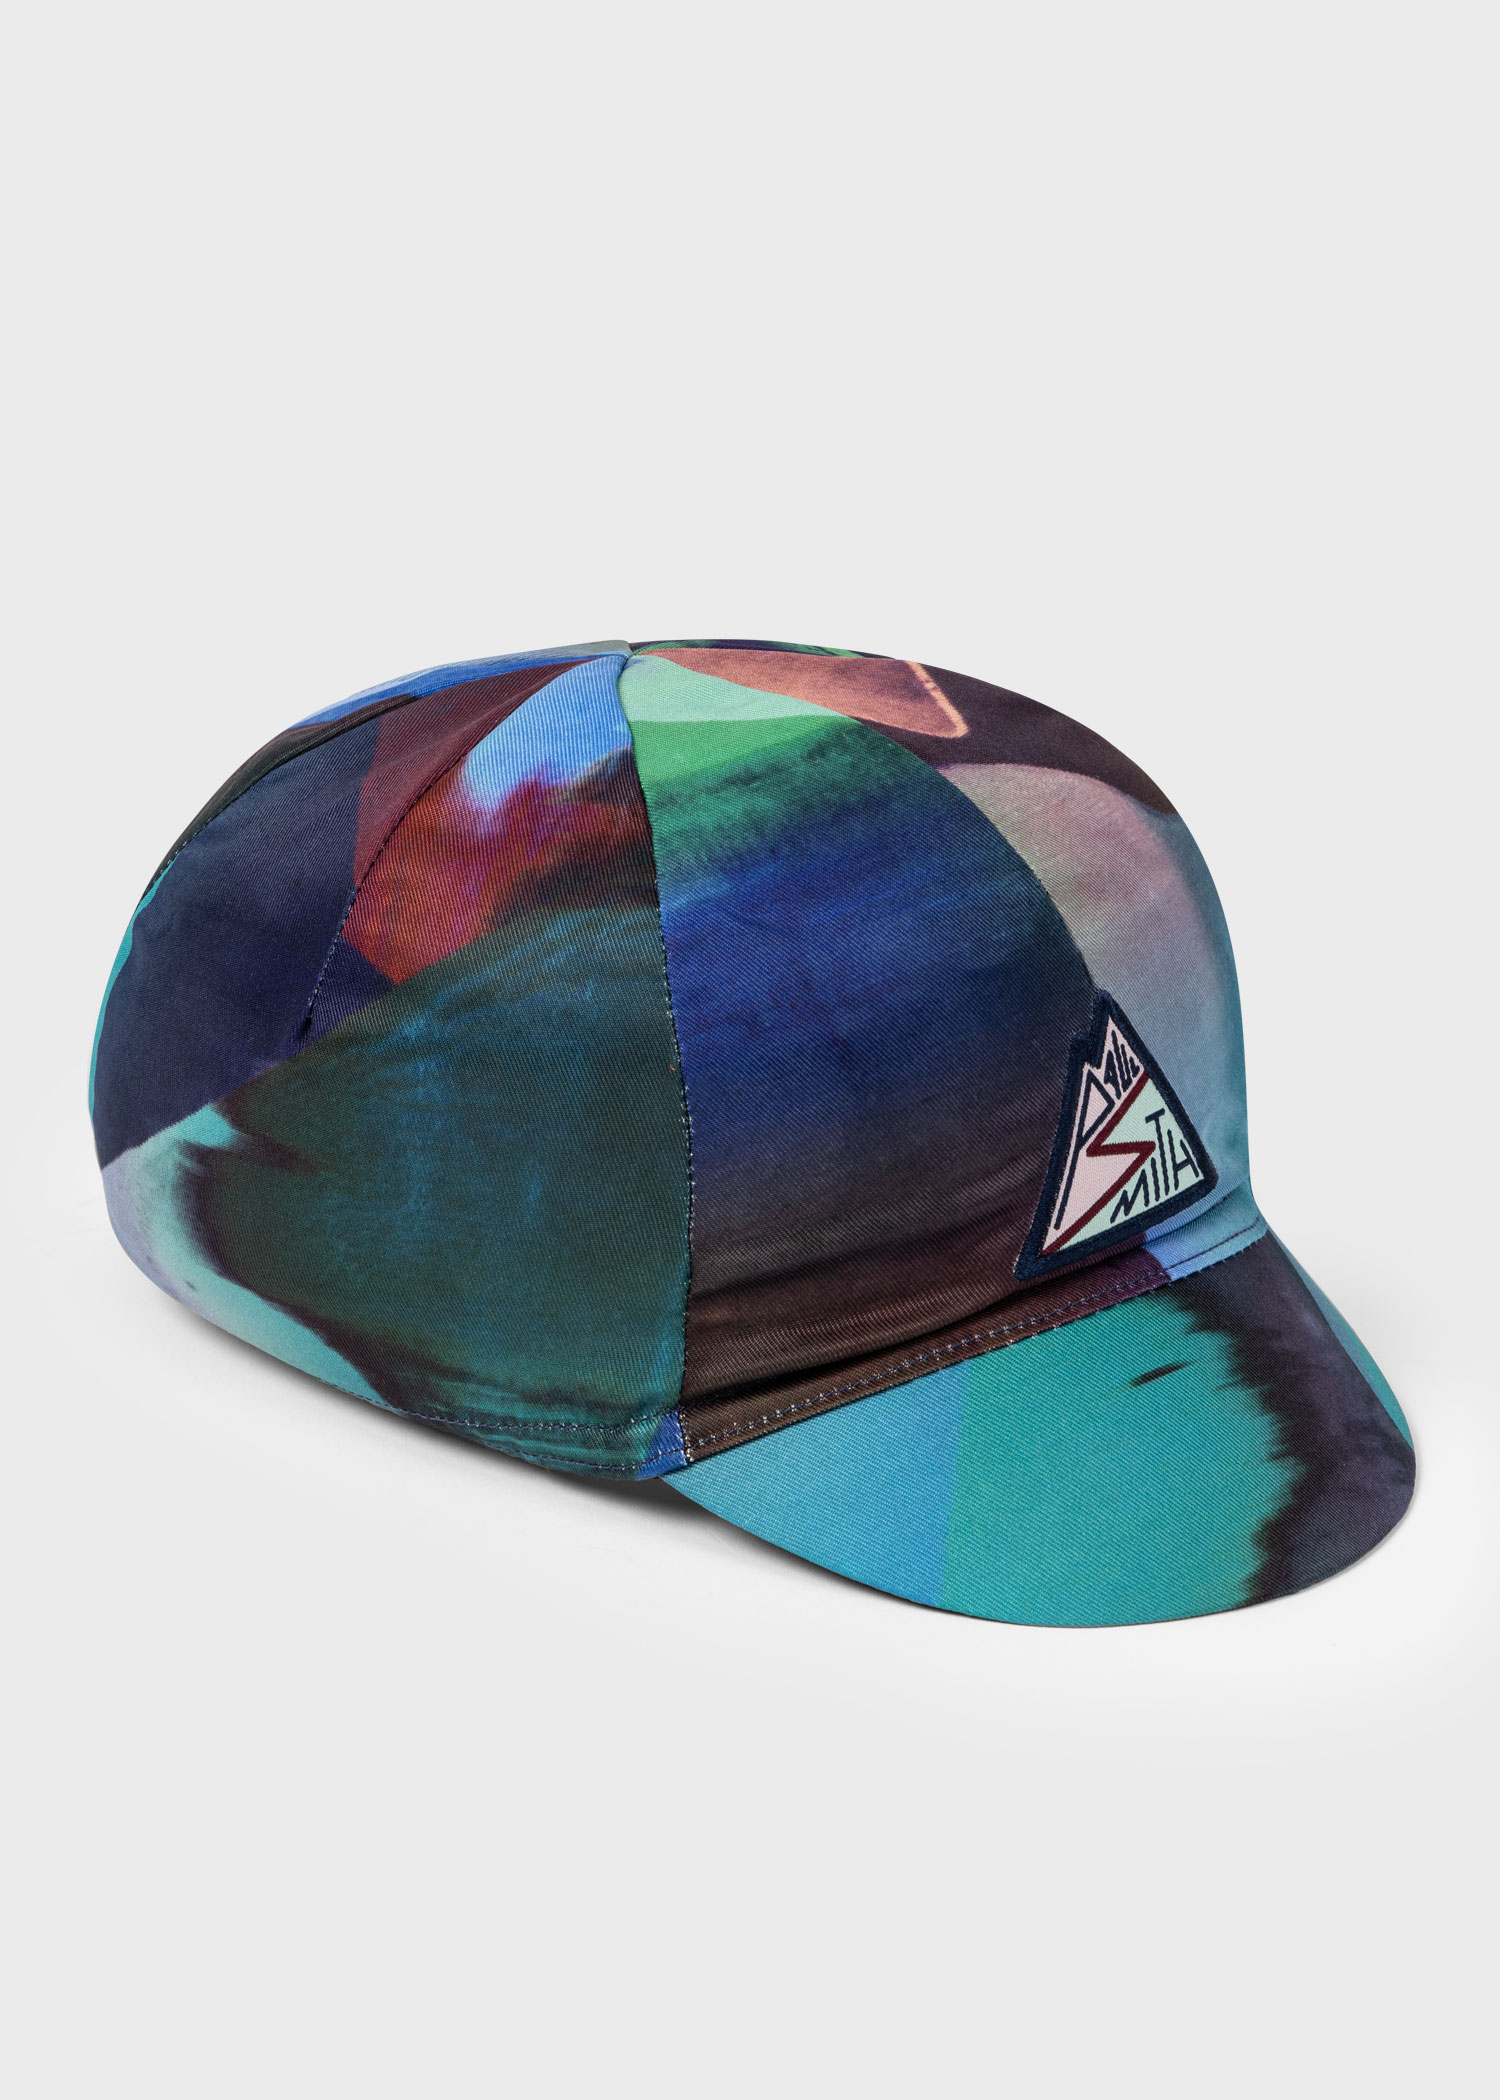 'Abstract Landscape' Cycling Cap